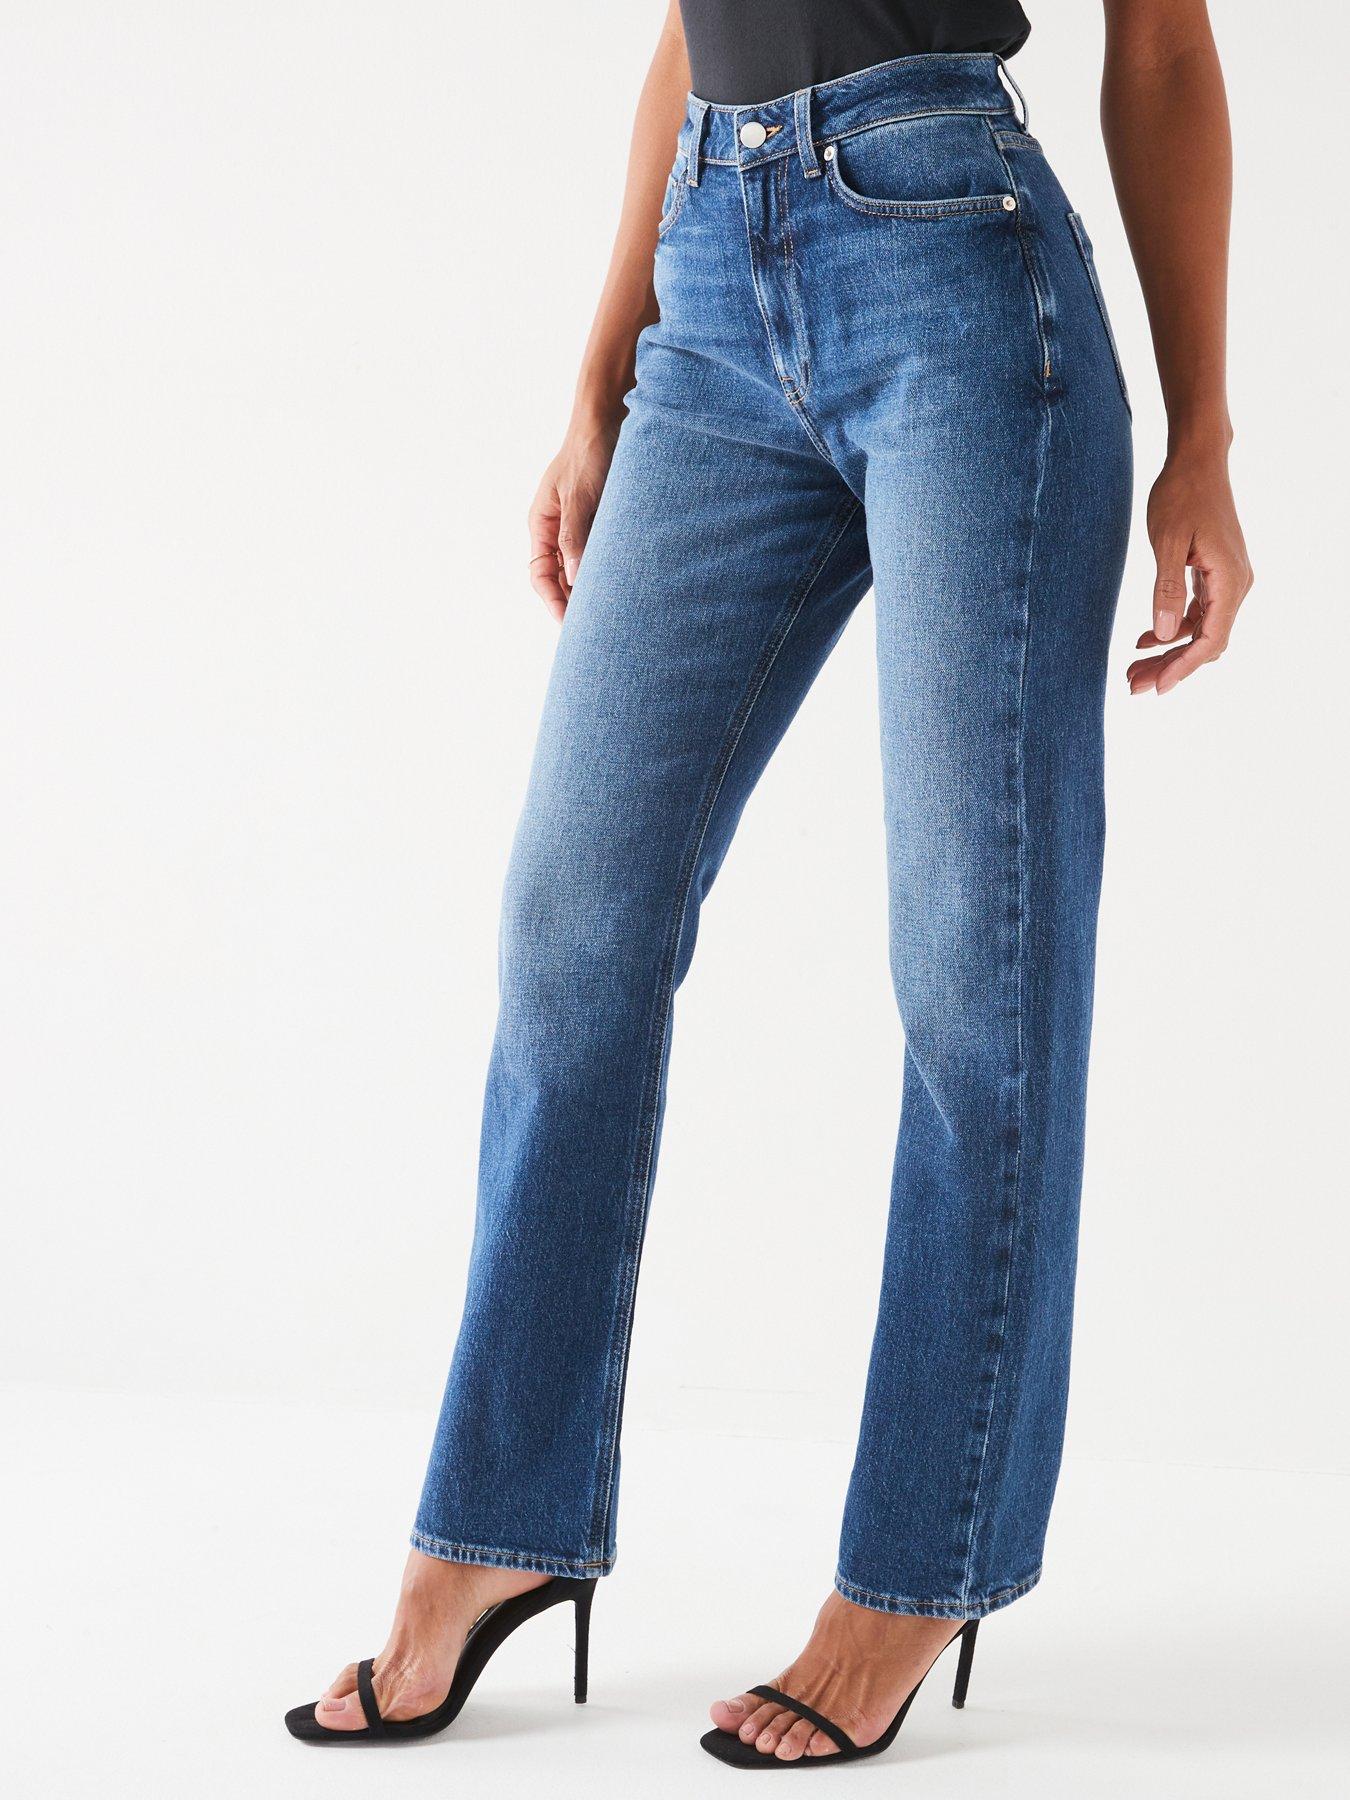 High Waisted Jeans, Women's Jeans